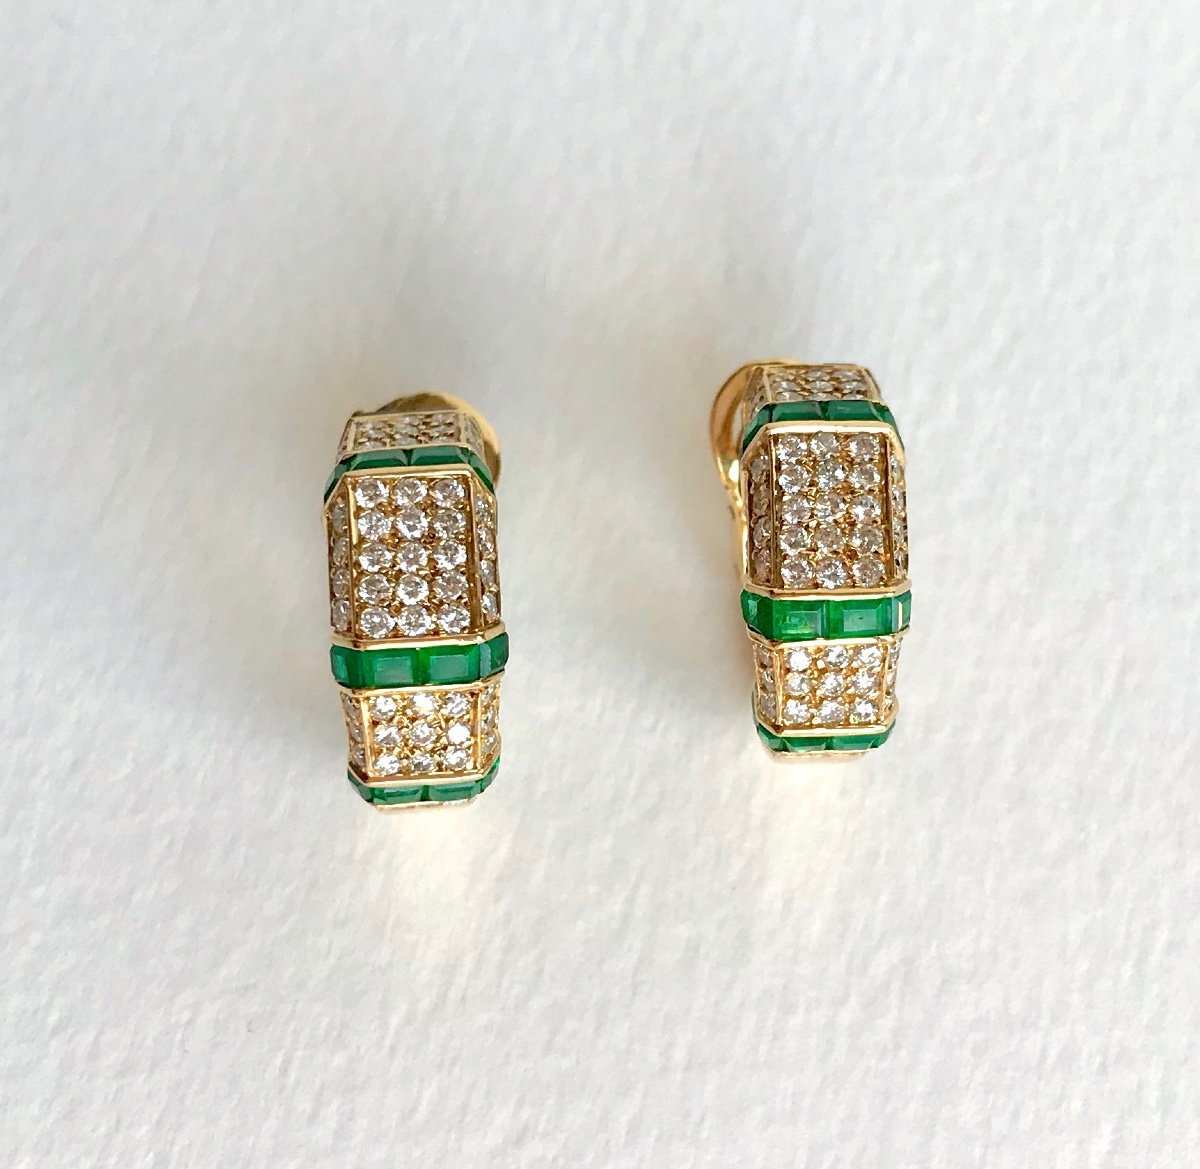 Piaget Earrings In 18 Kt Yellow Gold Diamonds And Emeralds.